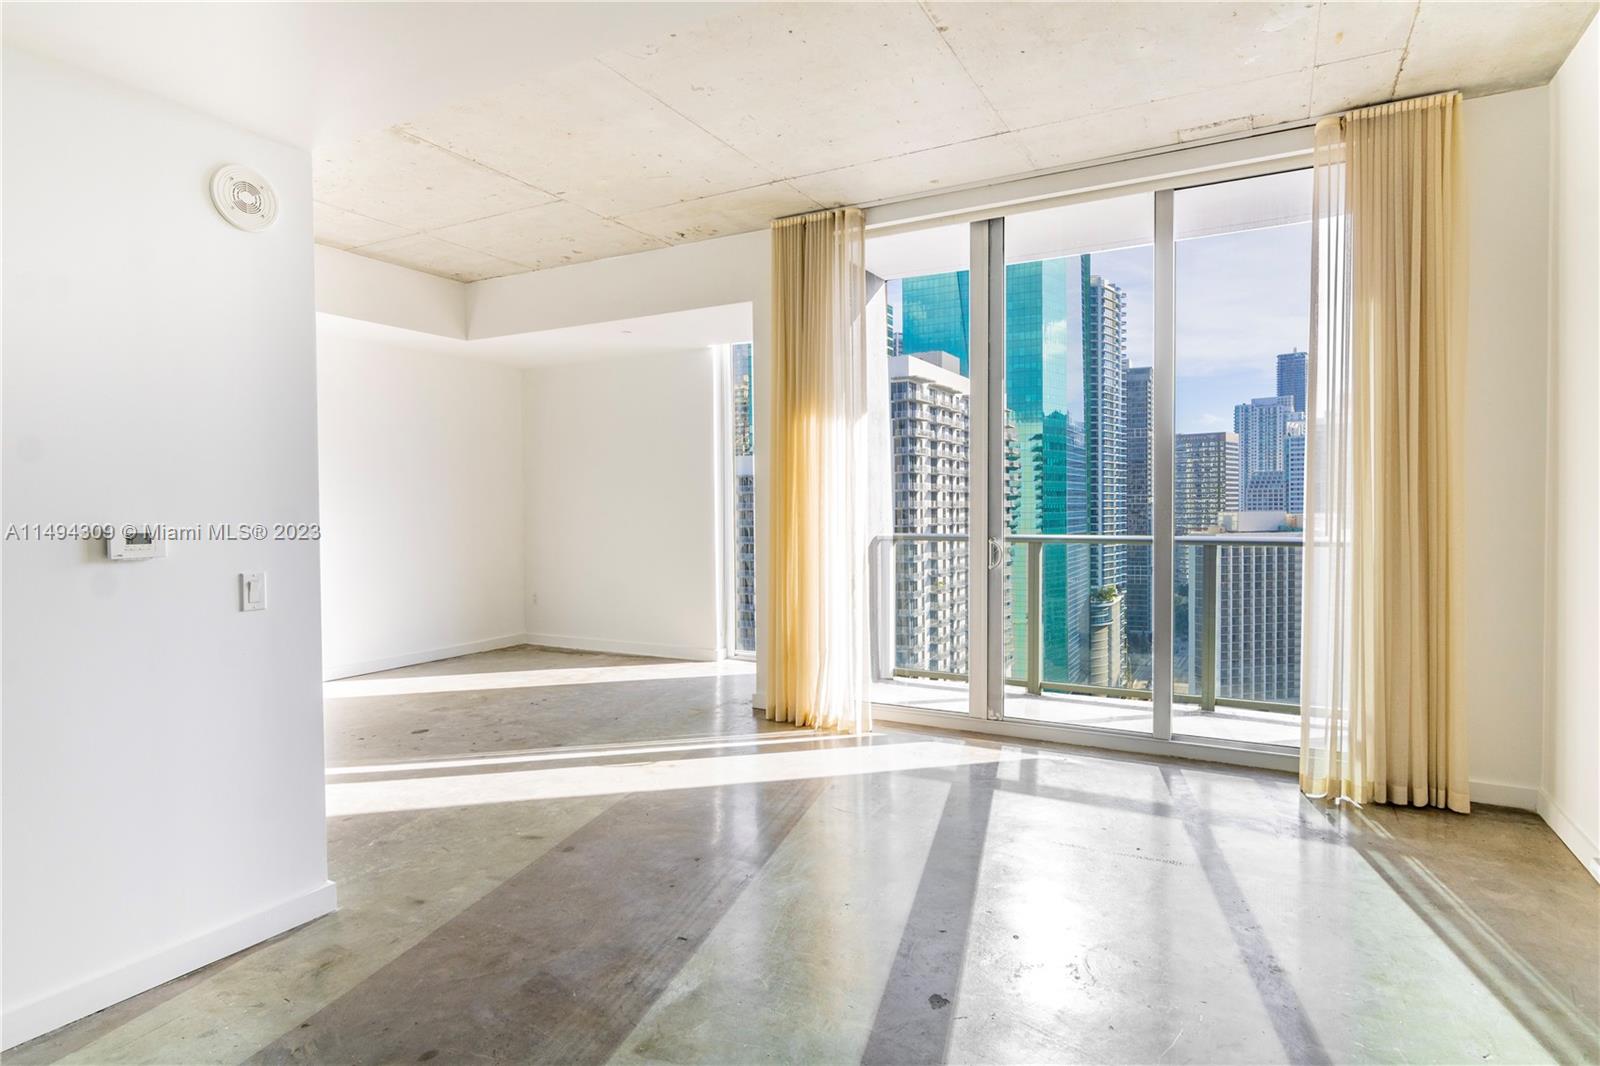 Stunning modern studio with incredible light through the entire unit. With one of the best views in the building, 2603 is a cool and trendy apartment overlooking Brickell avenue and the financial district. Ideal to entertain and have a fun lifestyle, this studio is ready to move in and enjoy what Miami has to offer. Centrally located in the heart of Downtown Miami and just minutes away from the vibrant Brickell district and the amazing brickell city center, this unit wont last long! Full service building, with great amenities and a wonderful rooftop pool. Priced Aggressively!